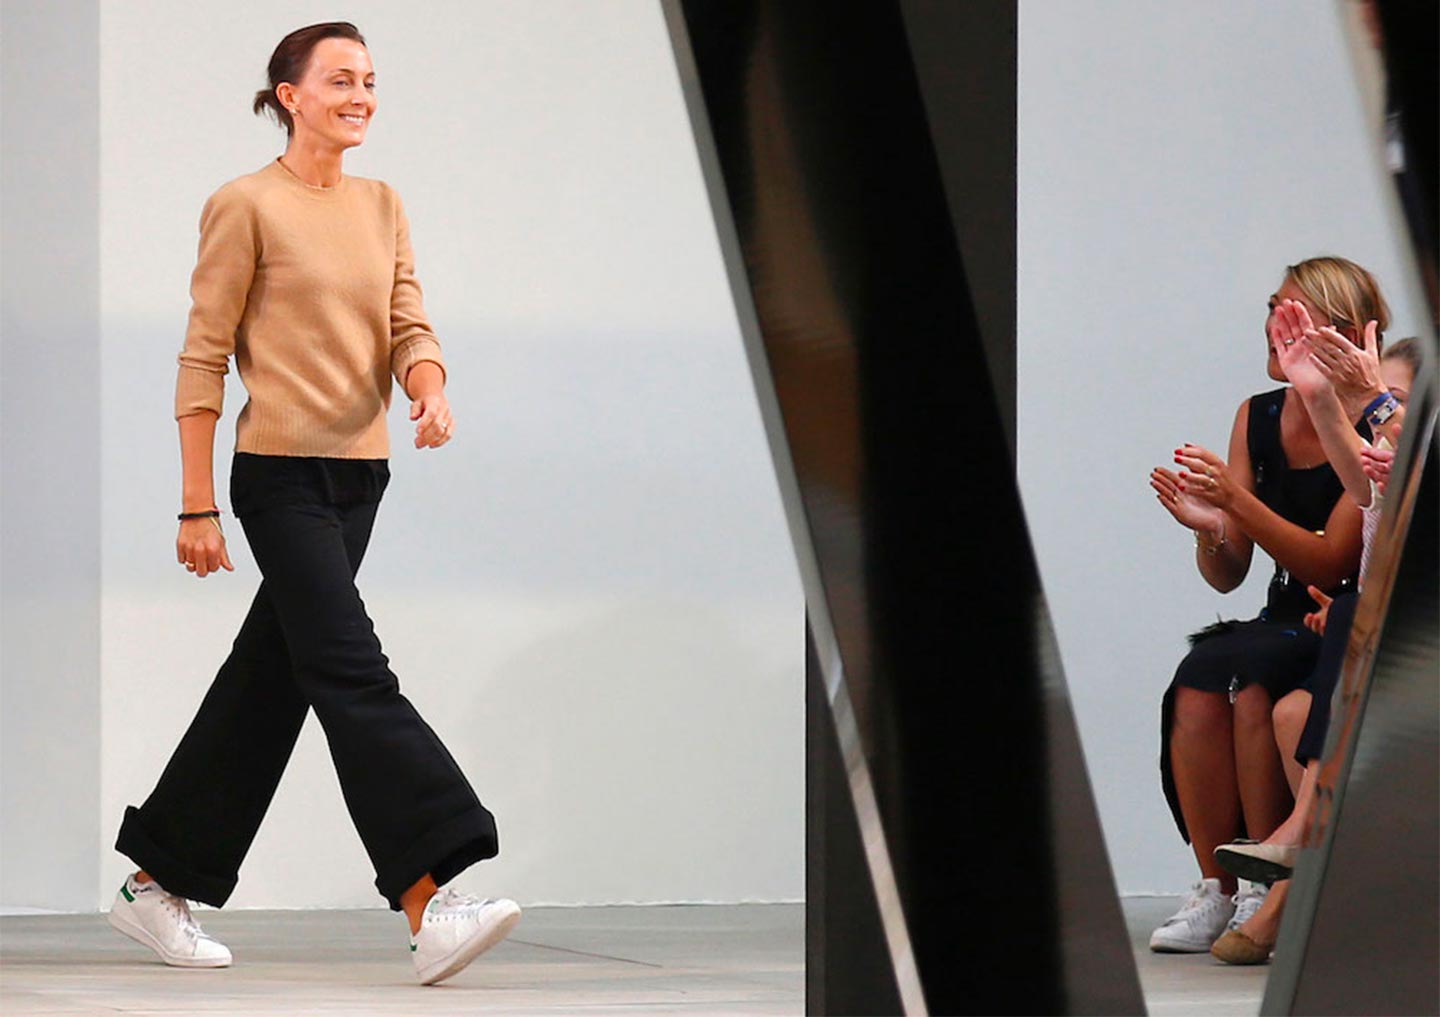 Phoebe Philo waves to the public at the end of a Céline's ready-to-wear fashion show